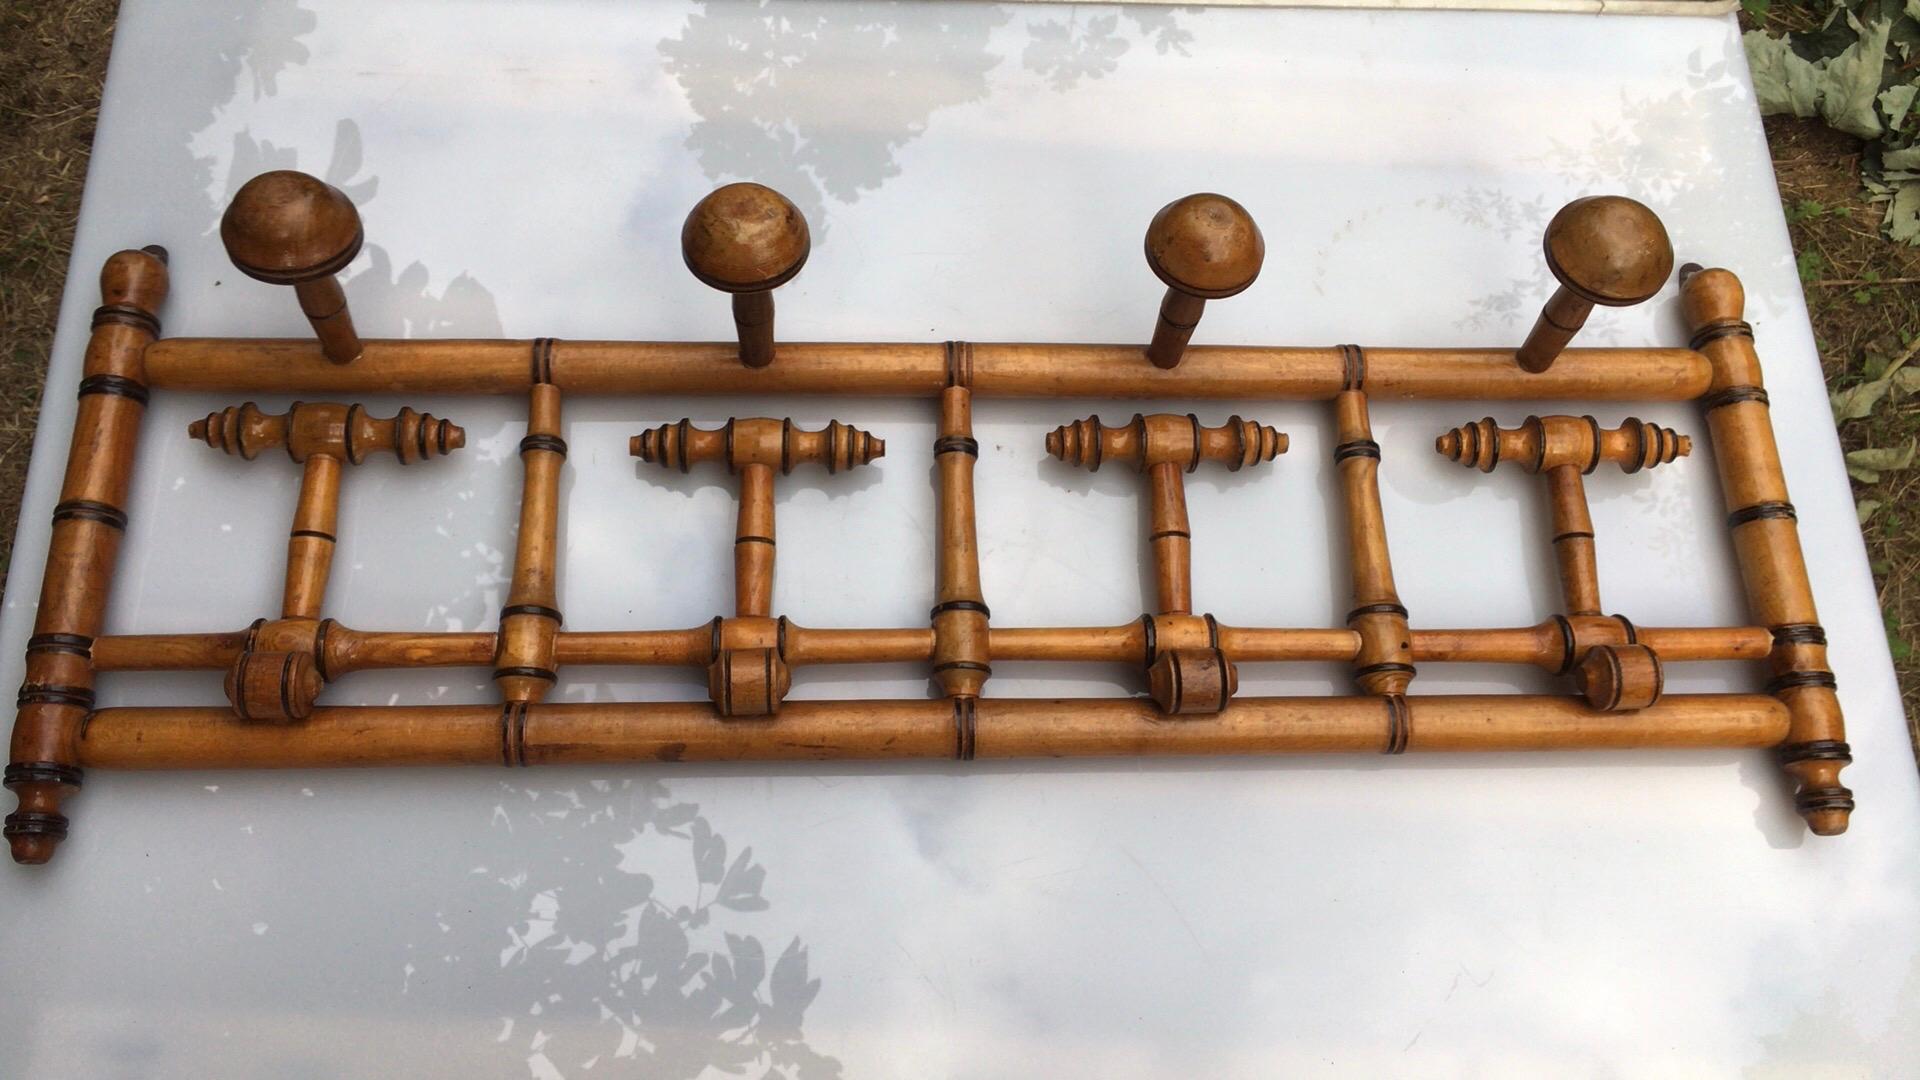 French Provincial Large French Faux Bamboo Coat Rack, circa 1900